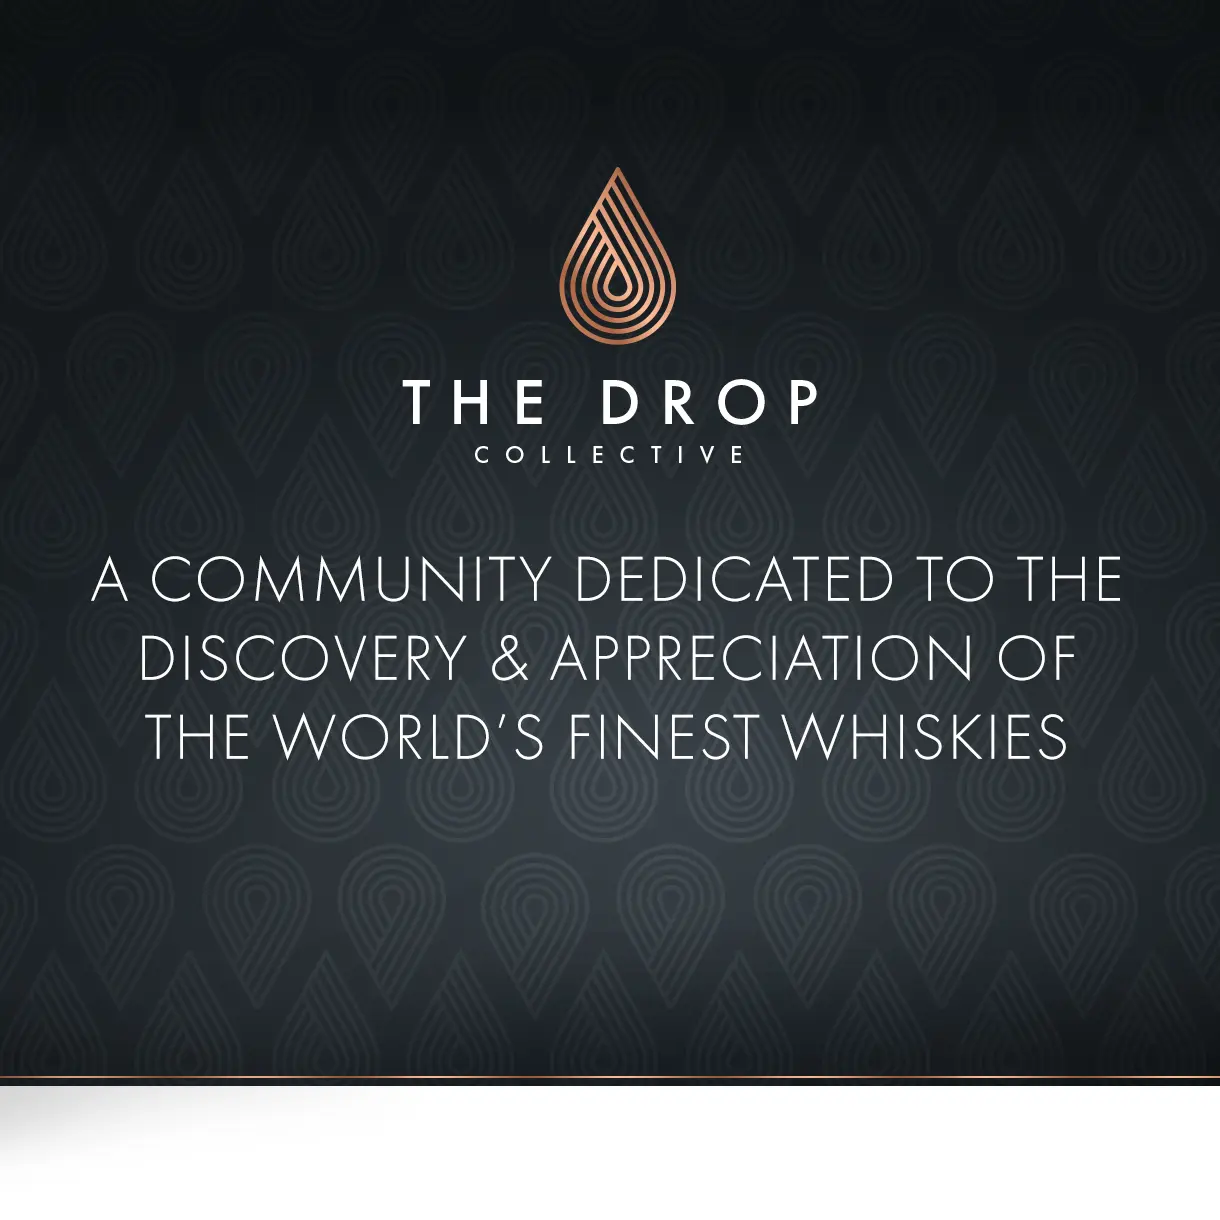 The Drop Collective - A community dedicated to the discovery & appreciation of the world’s finest whiskies